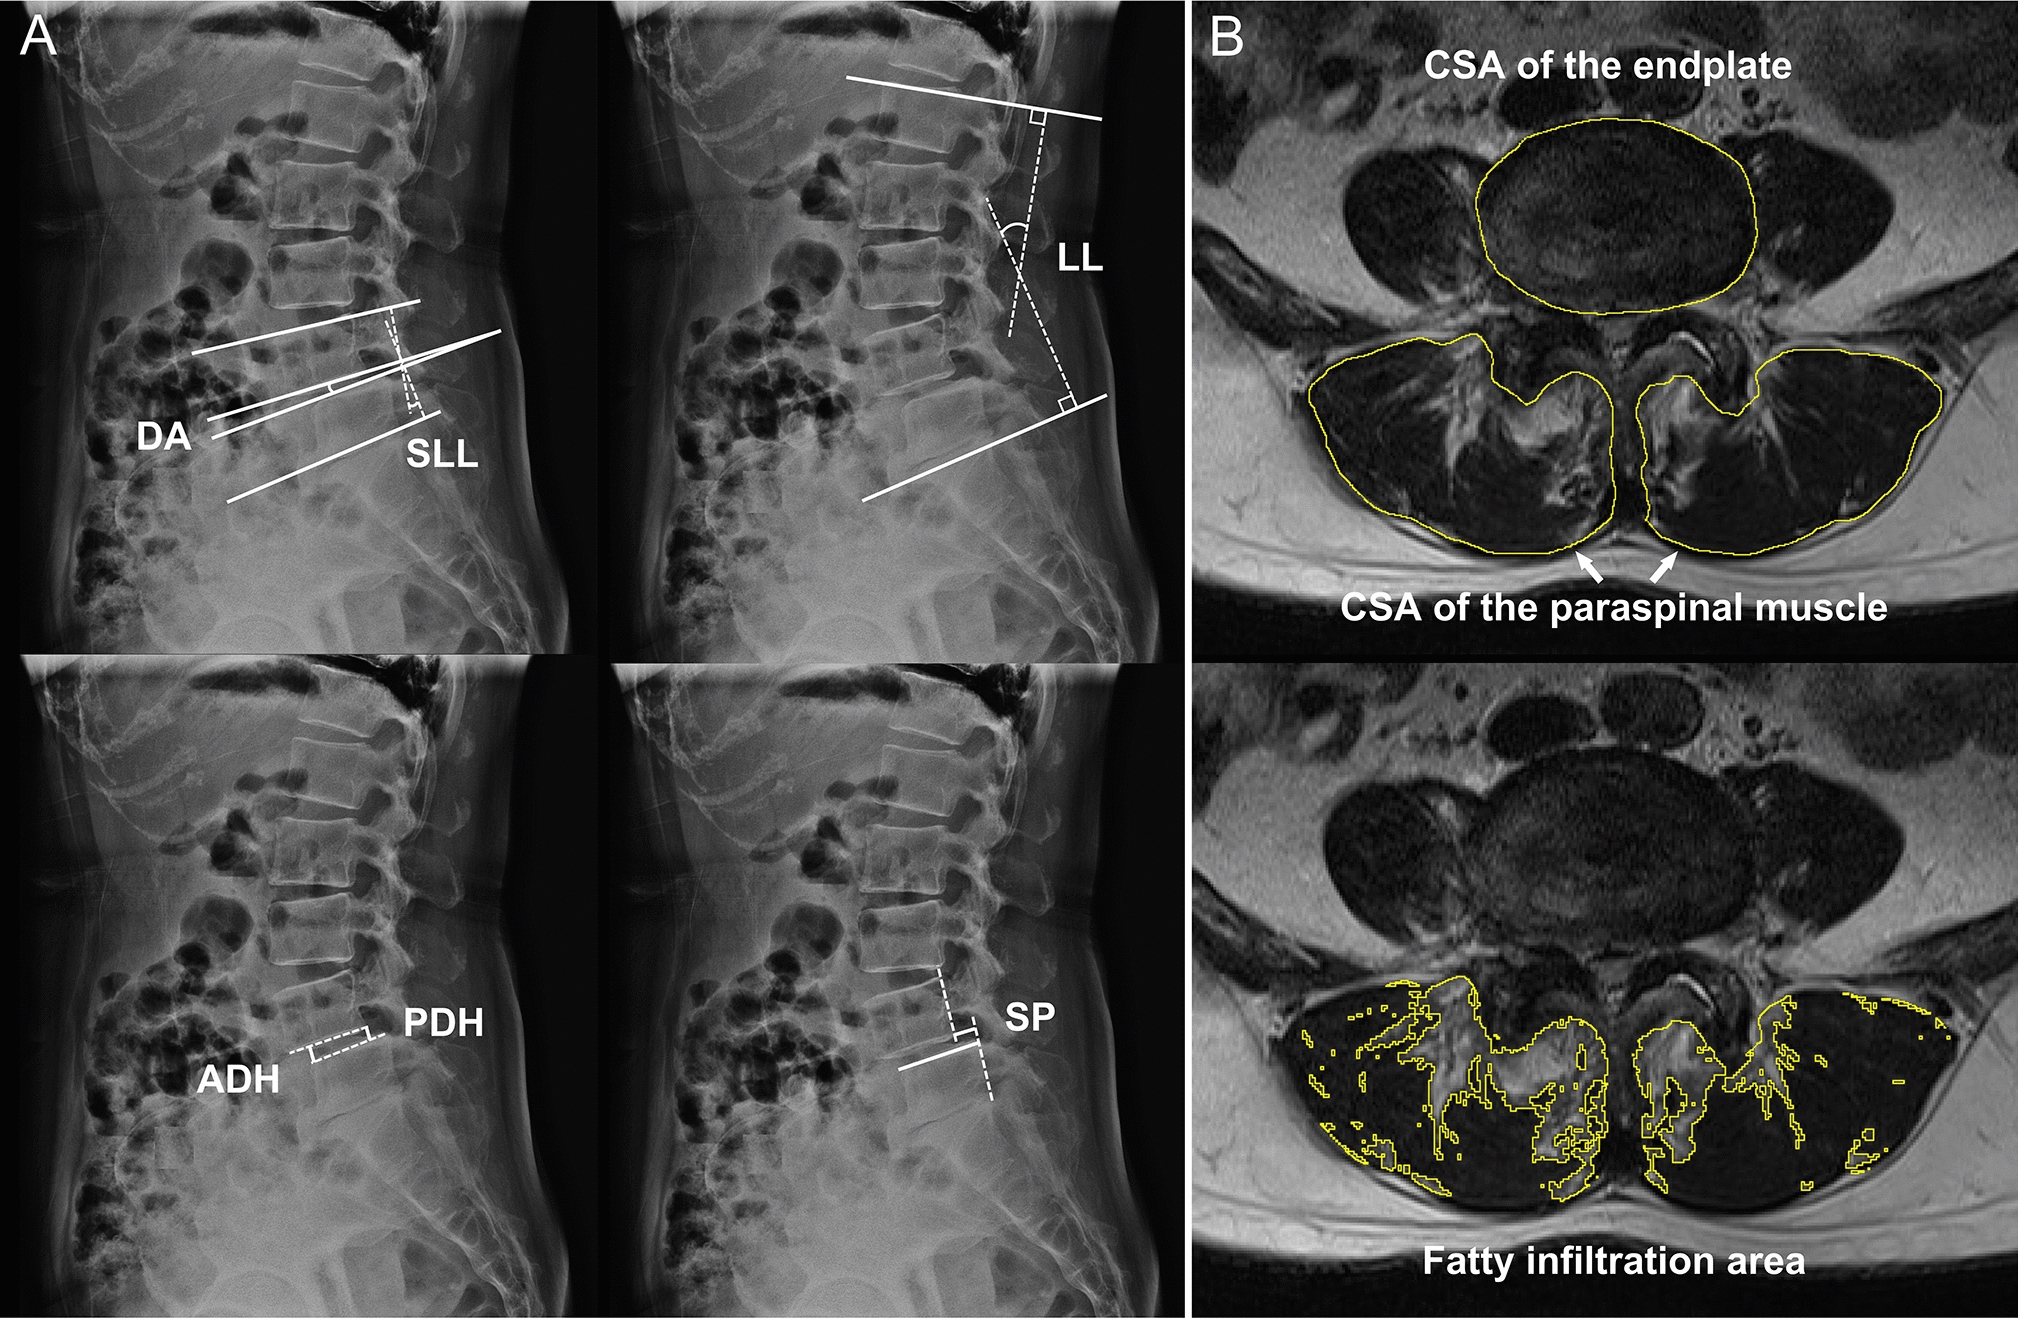 Radiographic and surgery-related predictive factors for increased segmental lumbar lordosis following lumbar fusion surgery in patients with degenerative lumbar spondylolisthesis